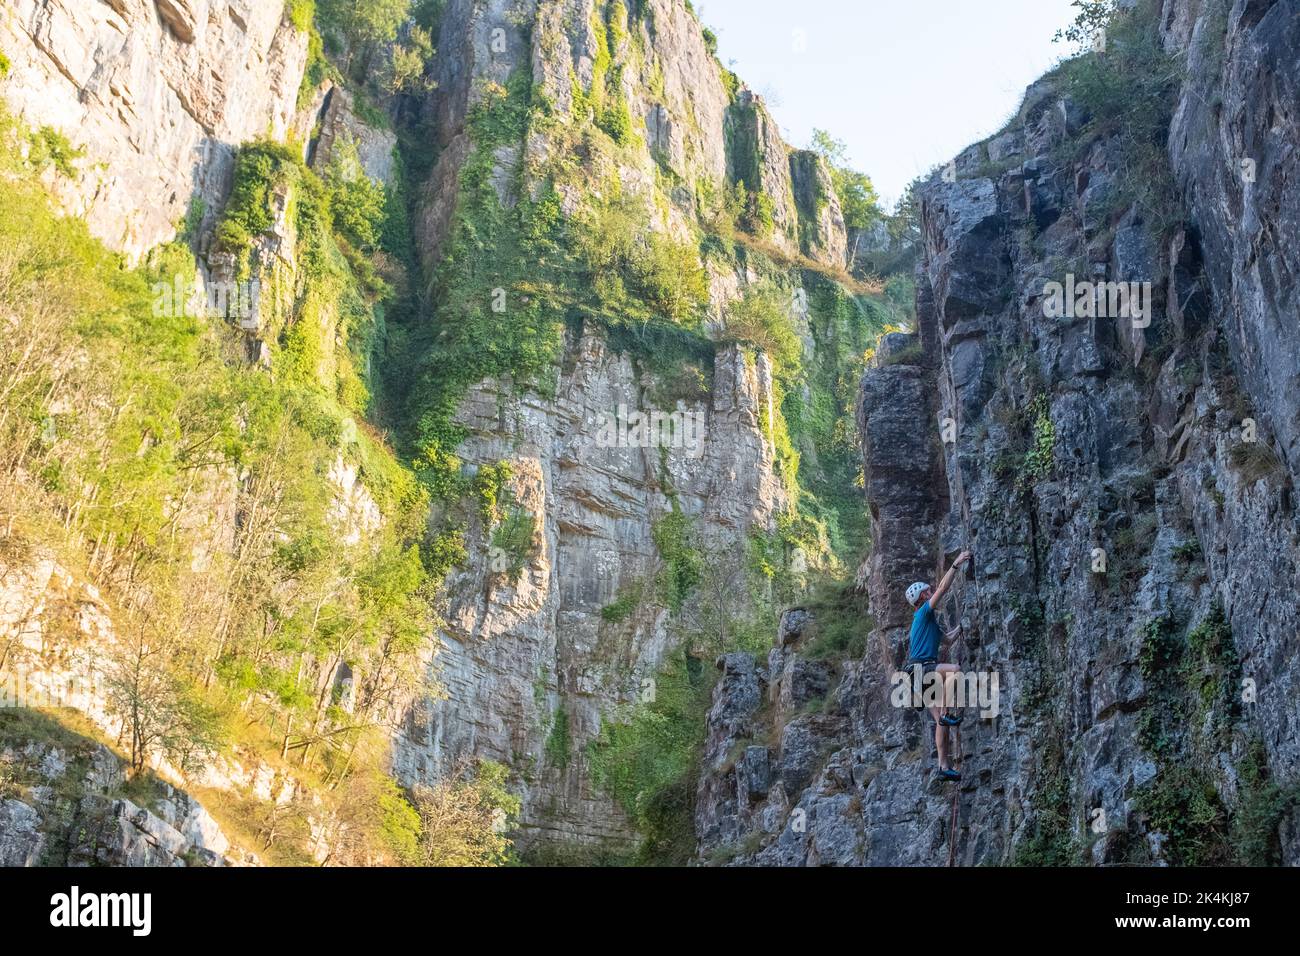 A rock climber at Cheddar Gorge in Somerset, England. Stock Photo